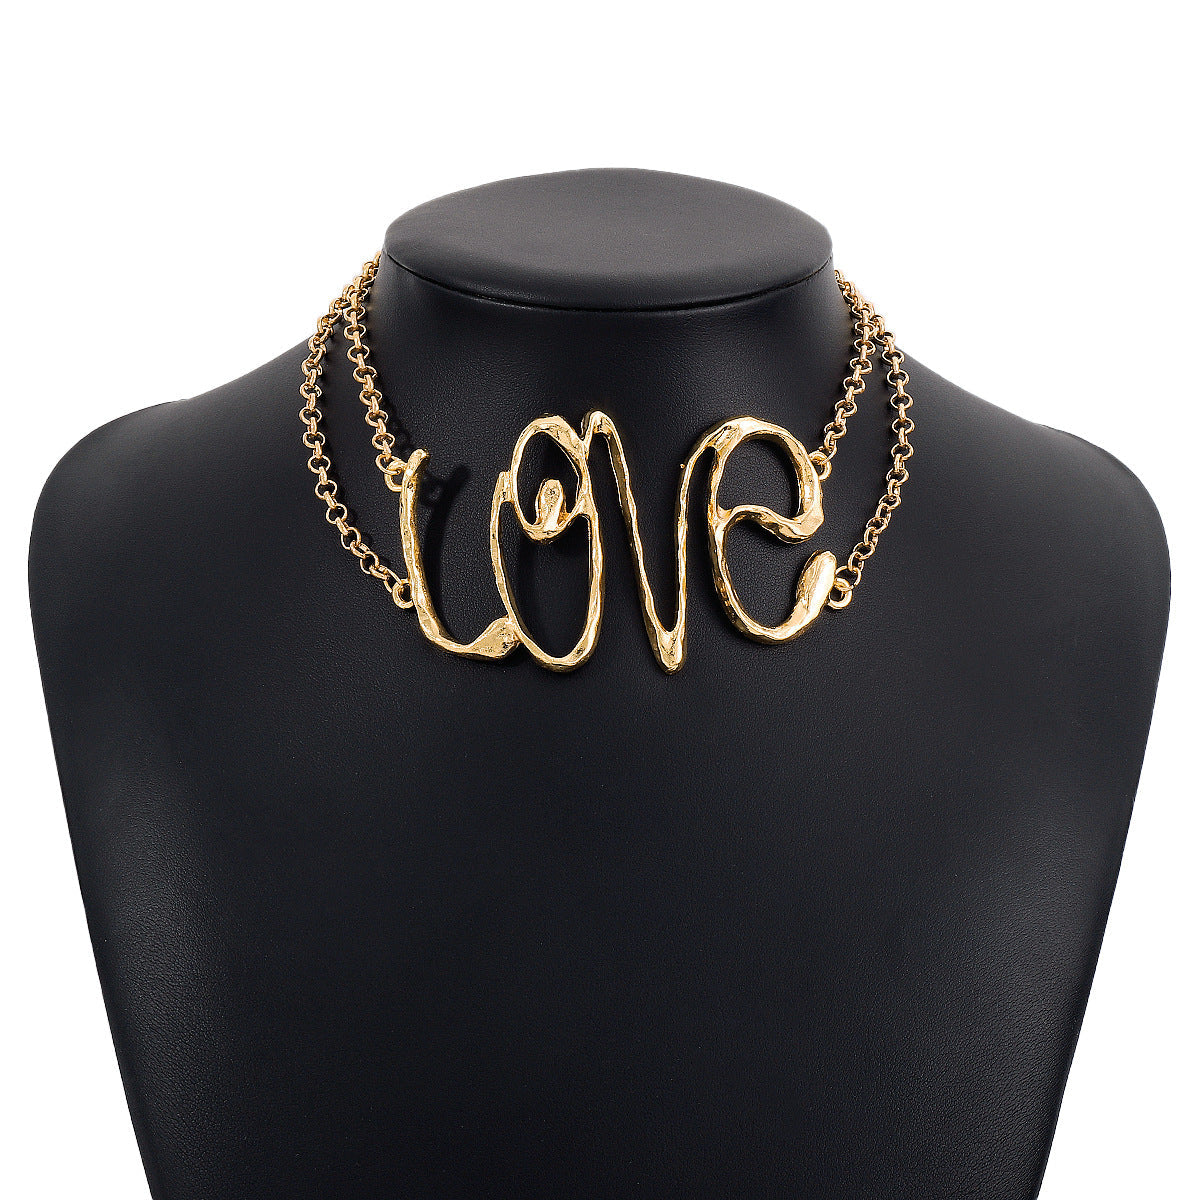 Exaggerated letters, cool necklace, retro fashionable hip-hop style necklace